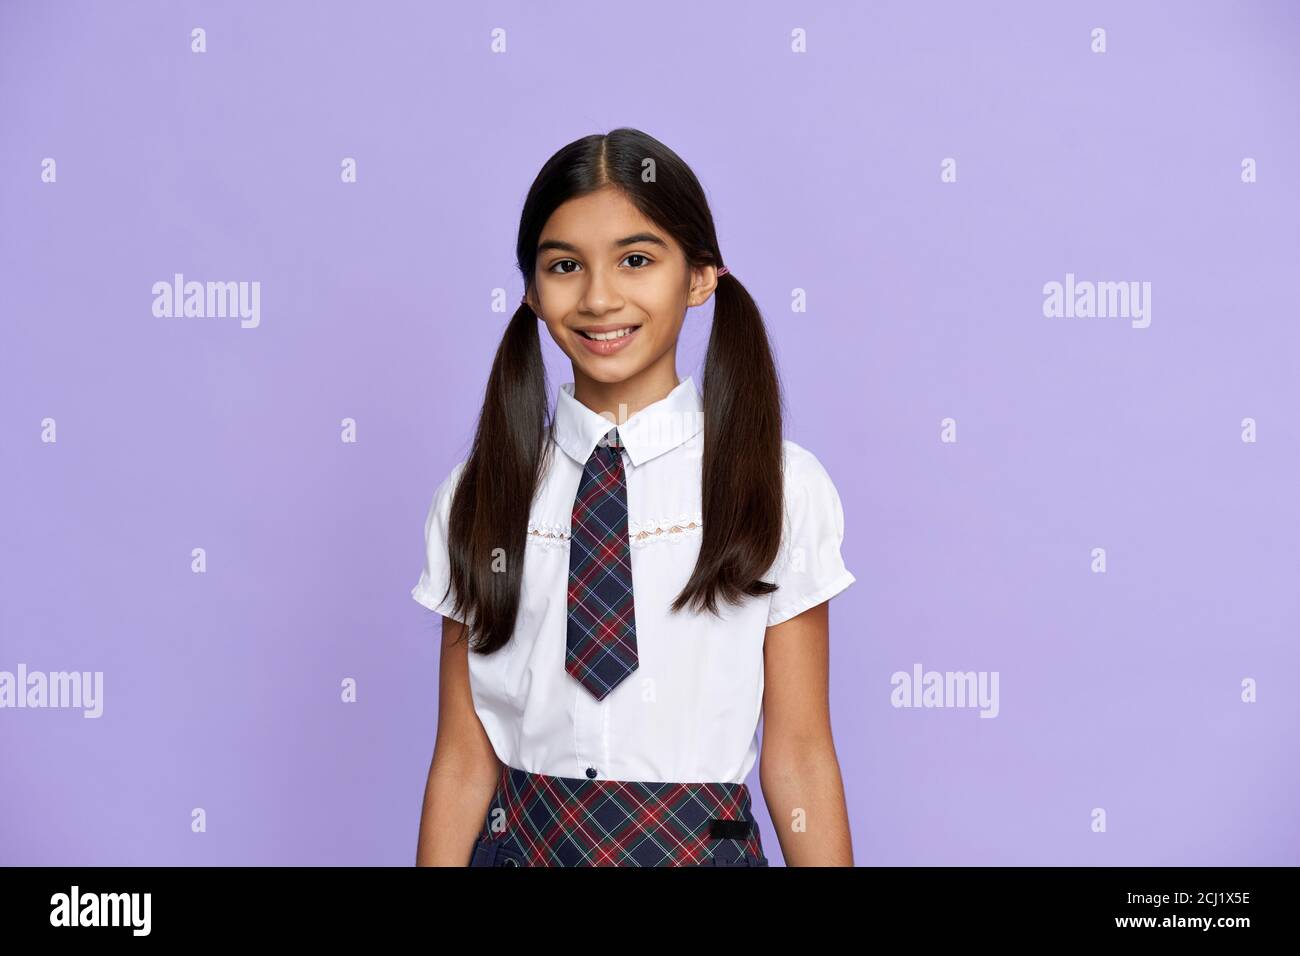 Smiling indian kid girl wear school uniform stand on lilac background, portrait. Stock Photo